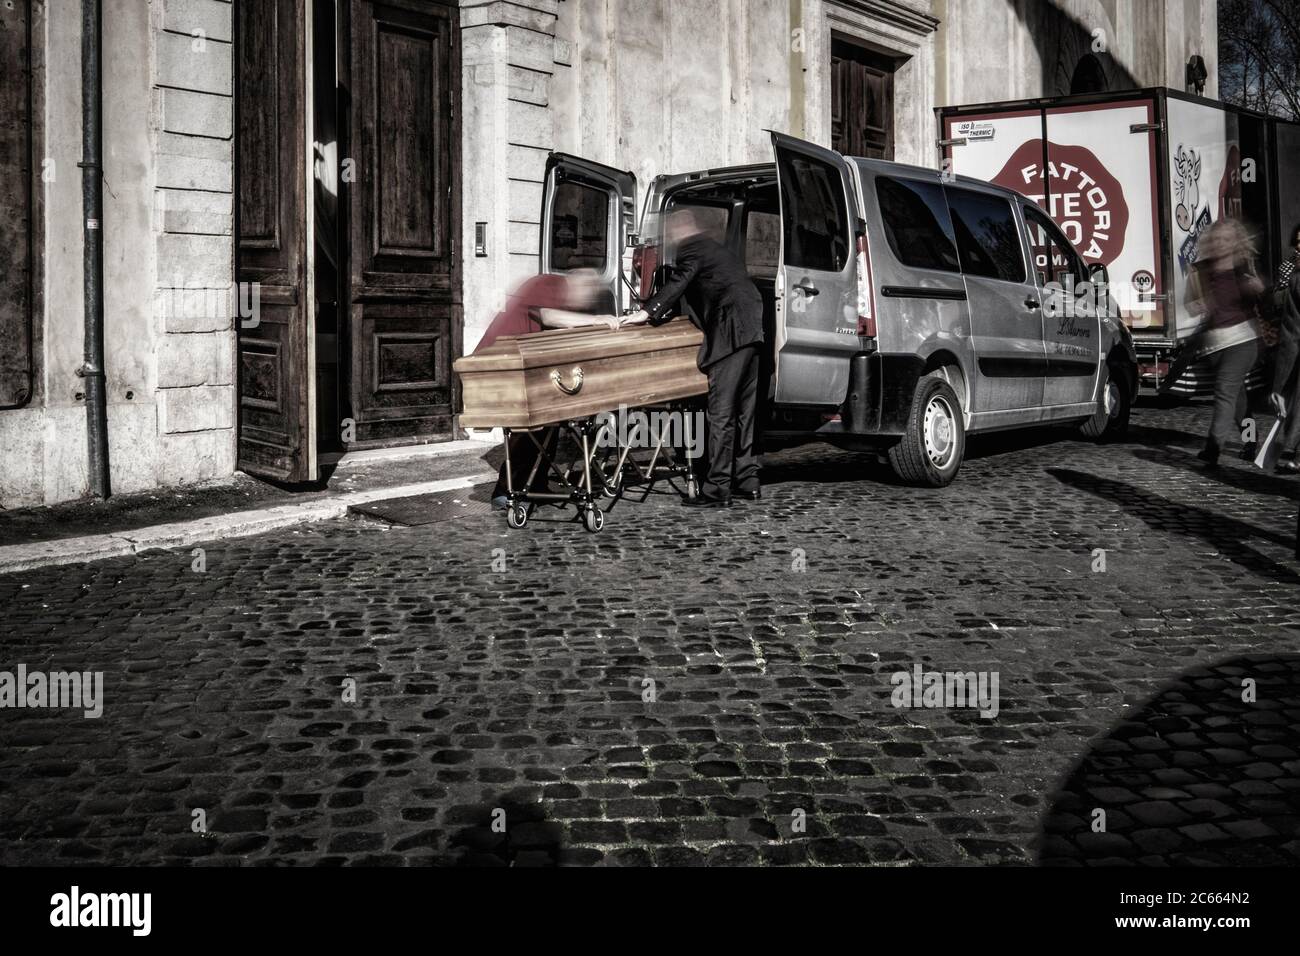 Dead man pushed into hearse in coffin, Rome, Italy Stock Photo